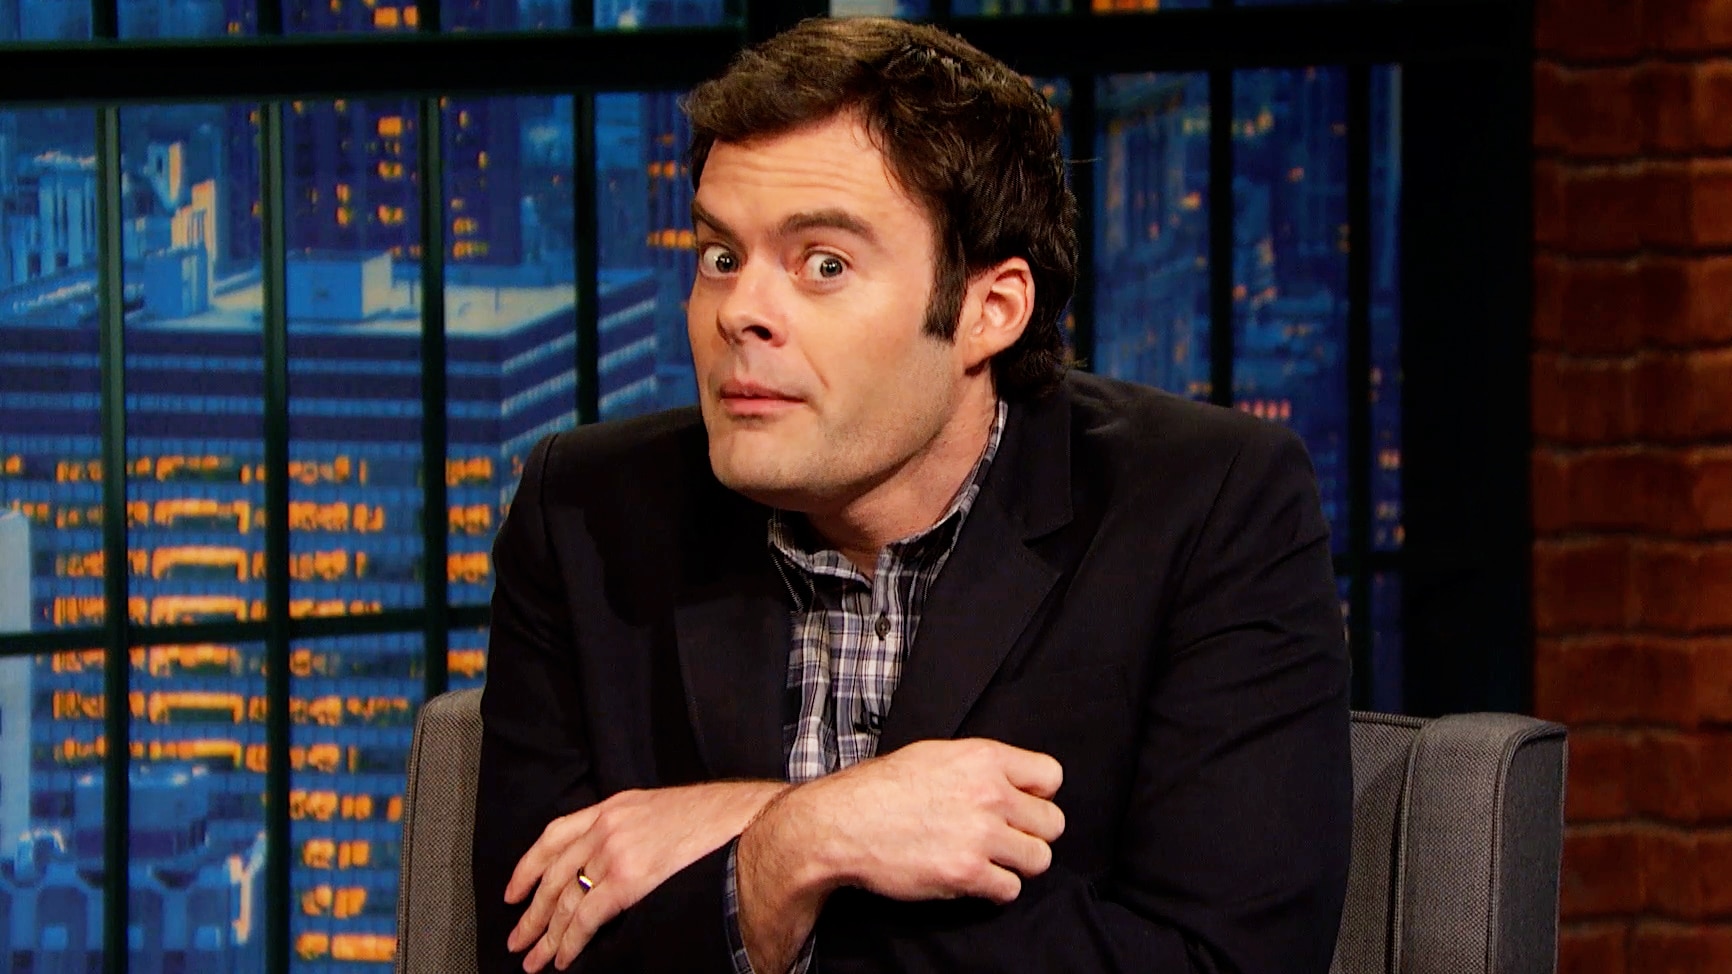 Watch Late Night with Seth Meyers interview 'Bill Hader Got "...